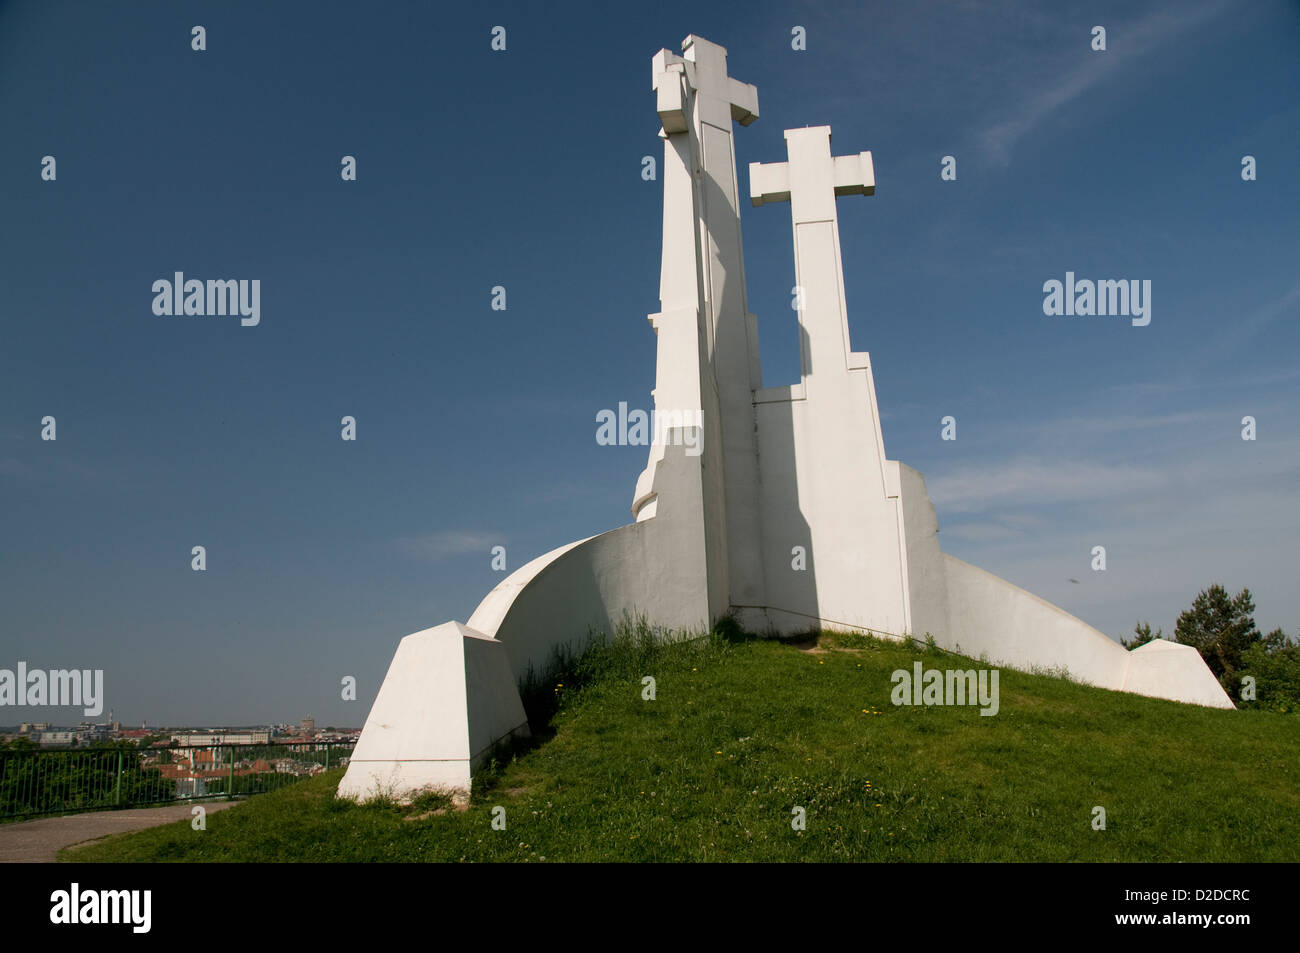 The Hill of Three Crosses monument made of white stone is a prominent landmark on top of a small hill within Kalnai Park of Vilnius in Lithuania, Stock Photo